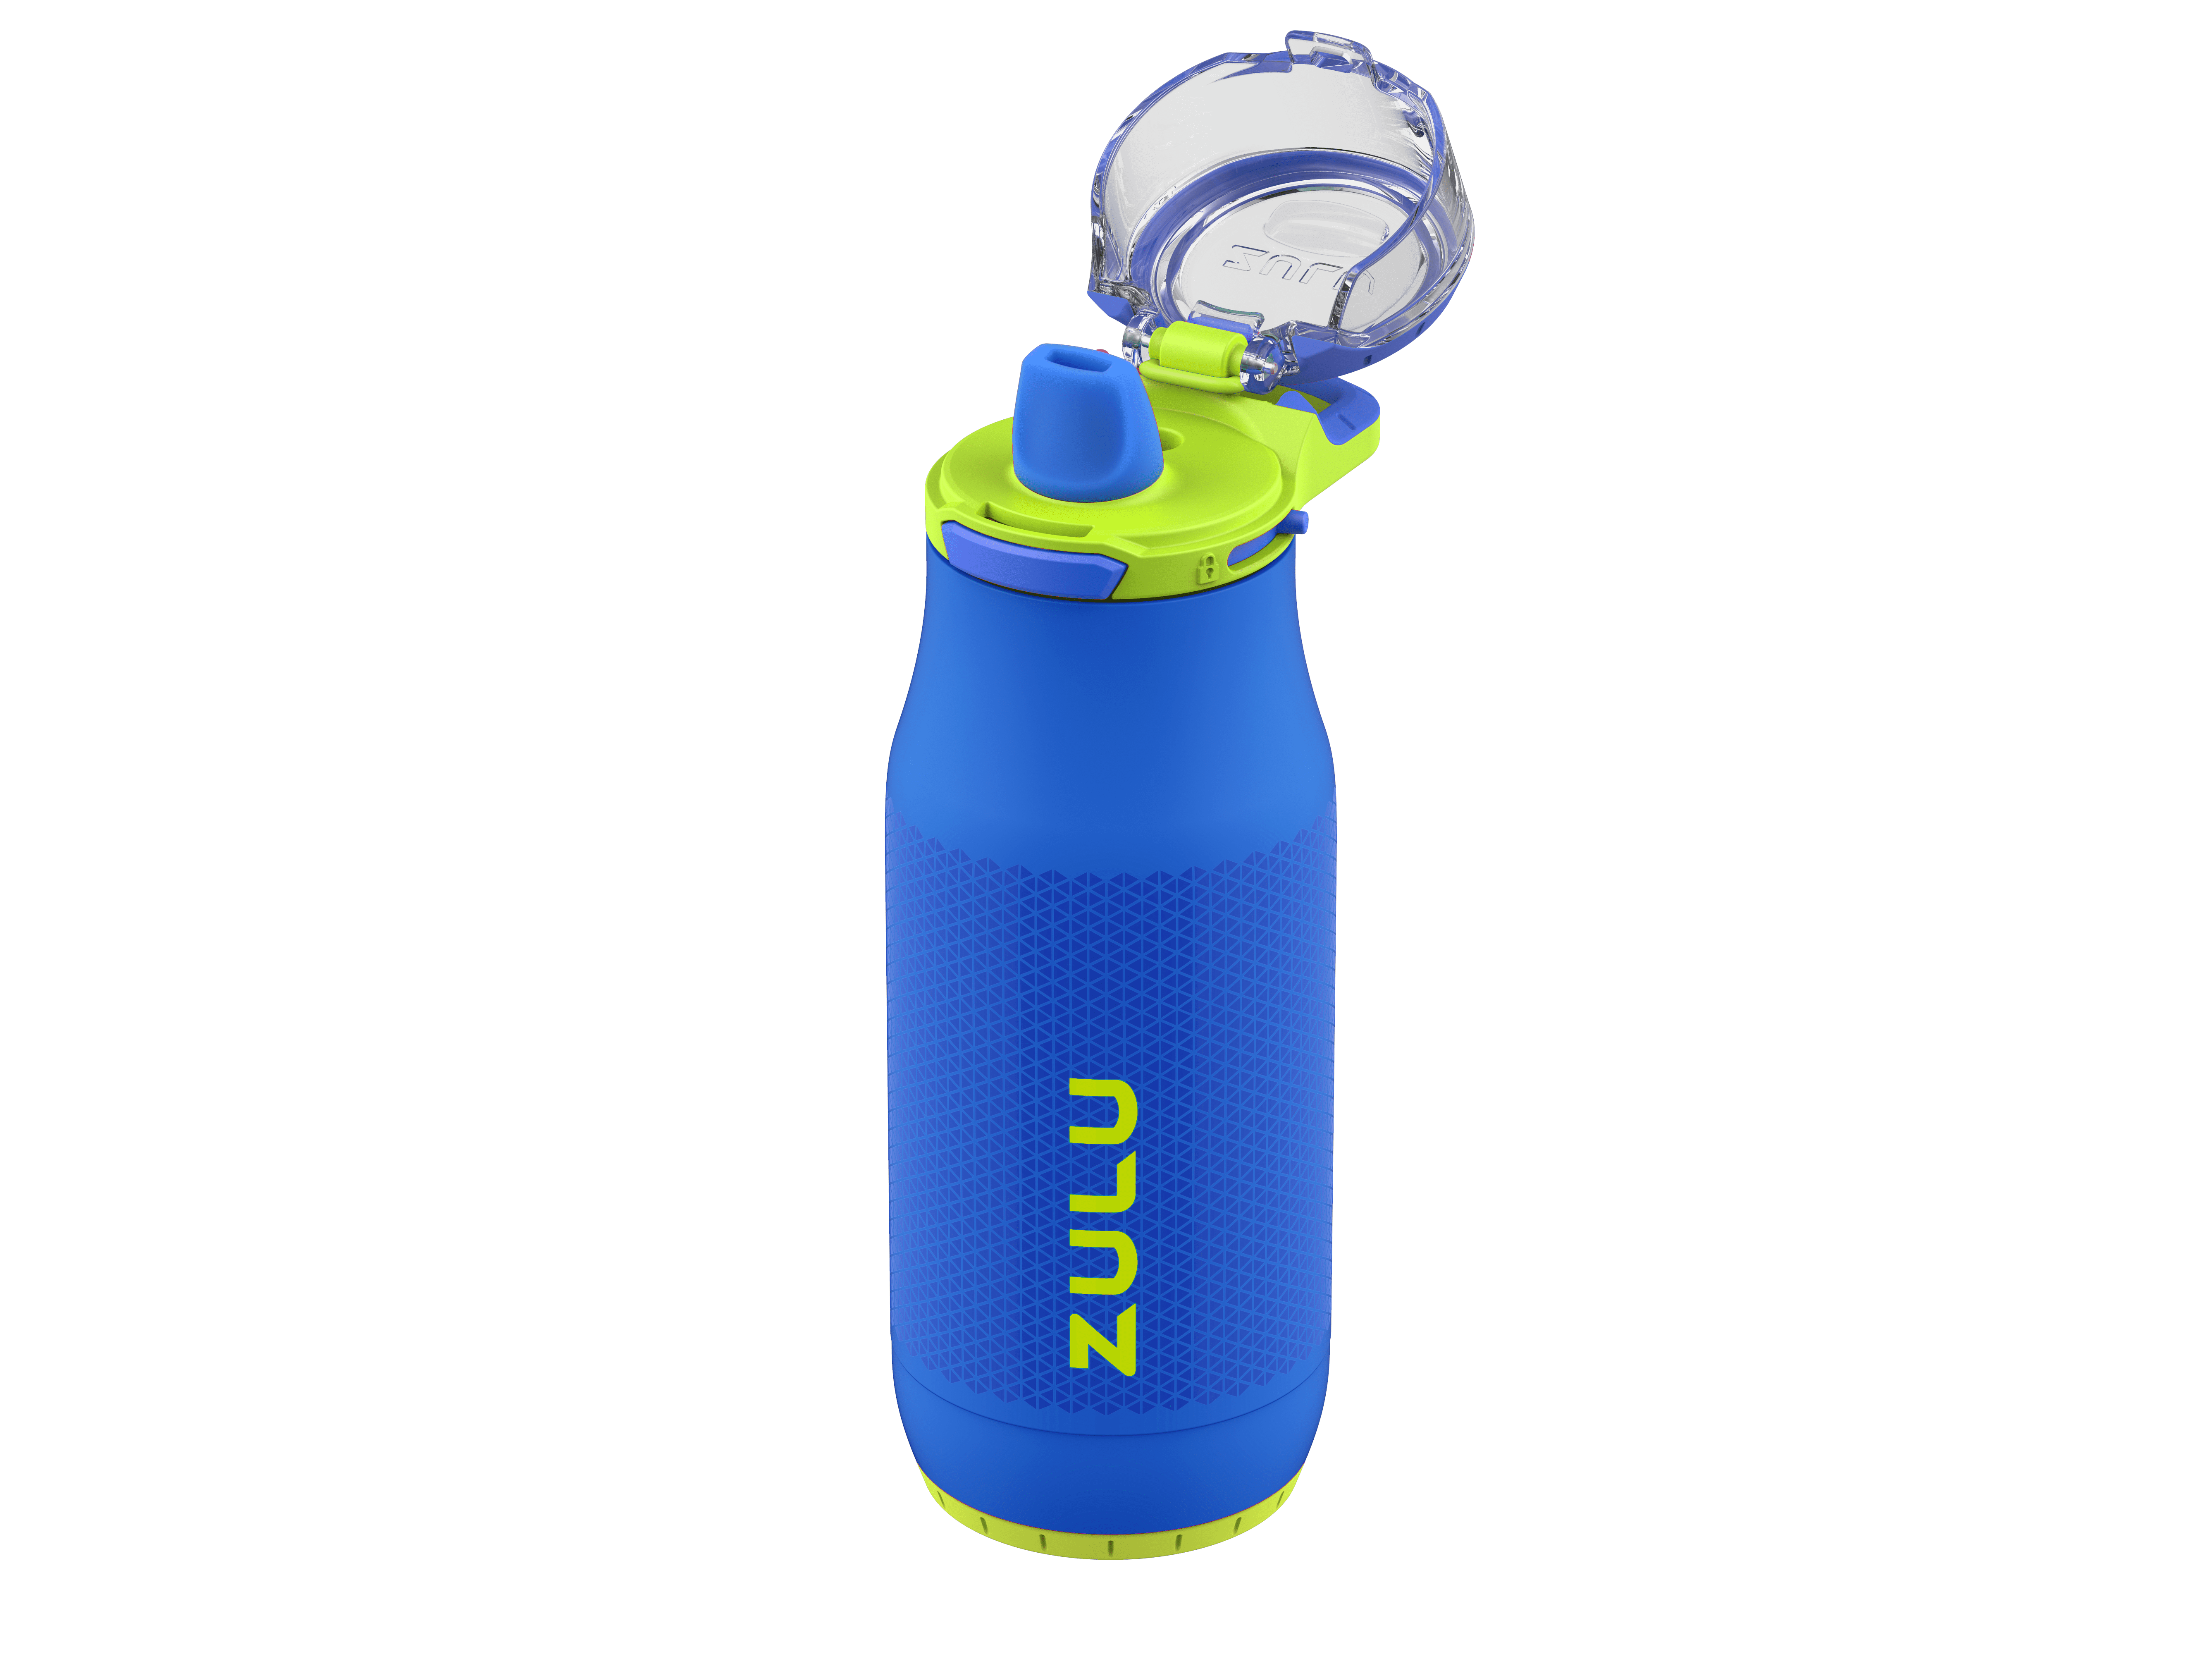 Zulu Kids Flex Water Bottle with Silicone Spout, Leak-Proof Locking Flip Lid and Soft Touch Carry Loop for School Backpack, Lunchbox, and Outdoor